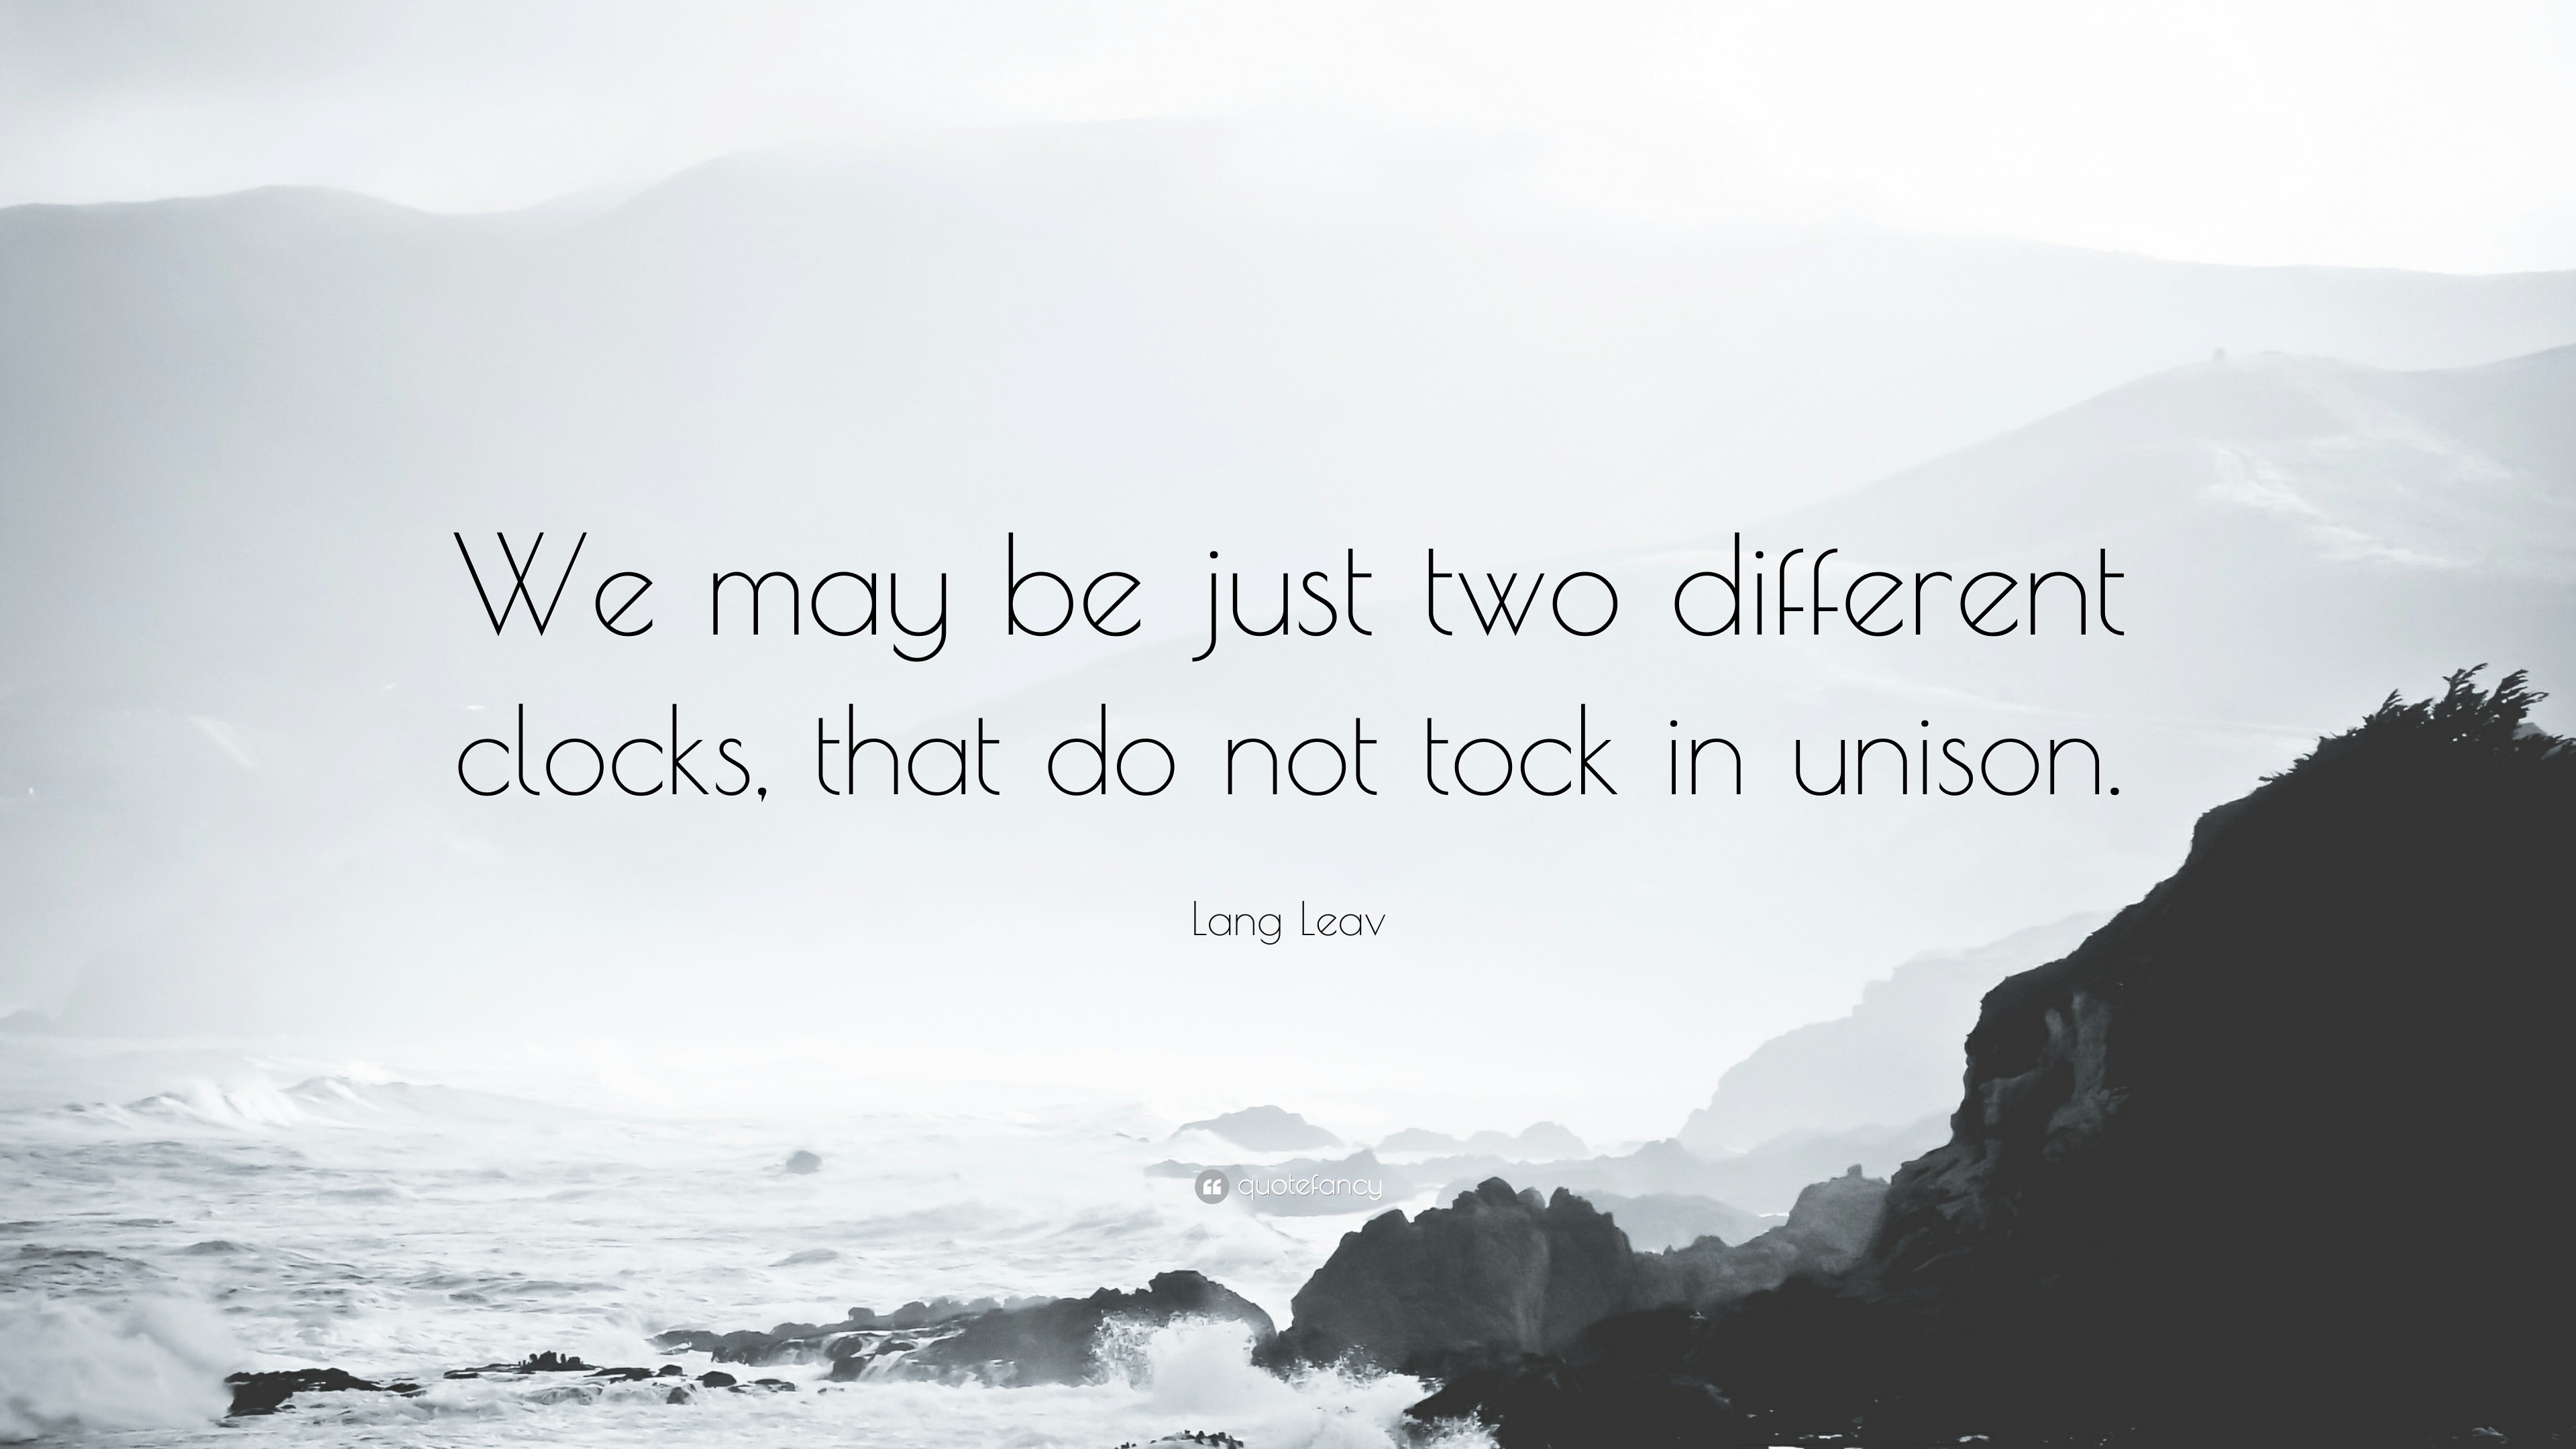 3840x2160 Lang Leav Quote: “We may be just two different clocks, that do not